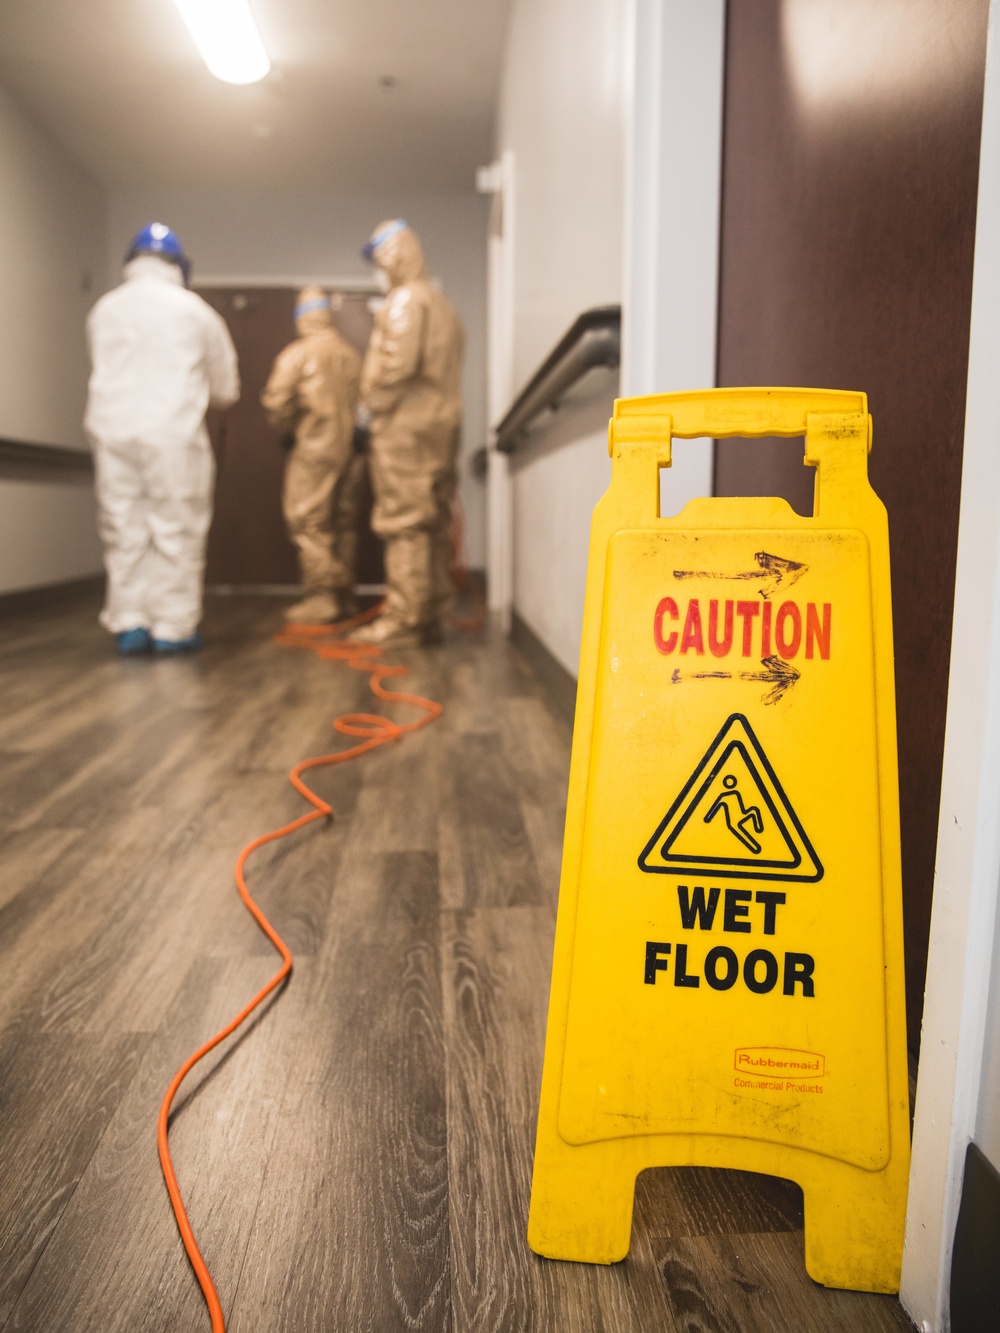 116th Air Control wing assists residents of long-term care facility during COVID-19 pandemic